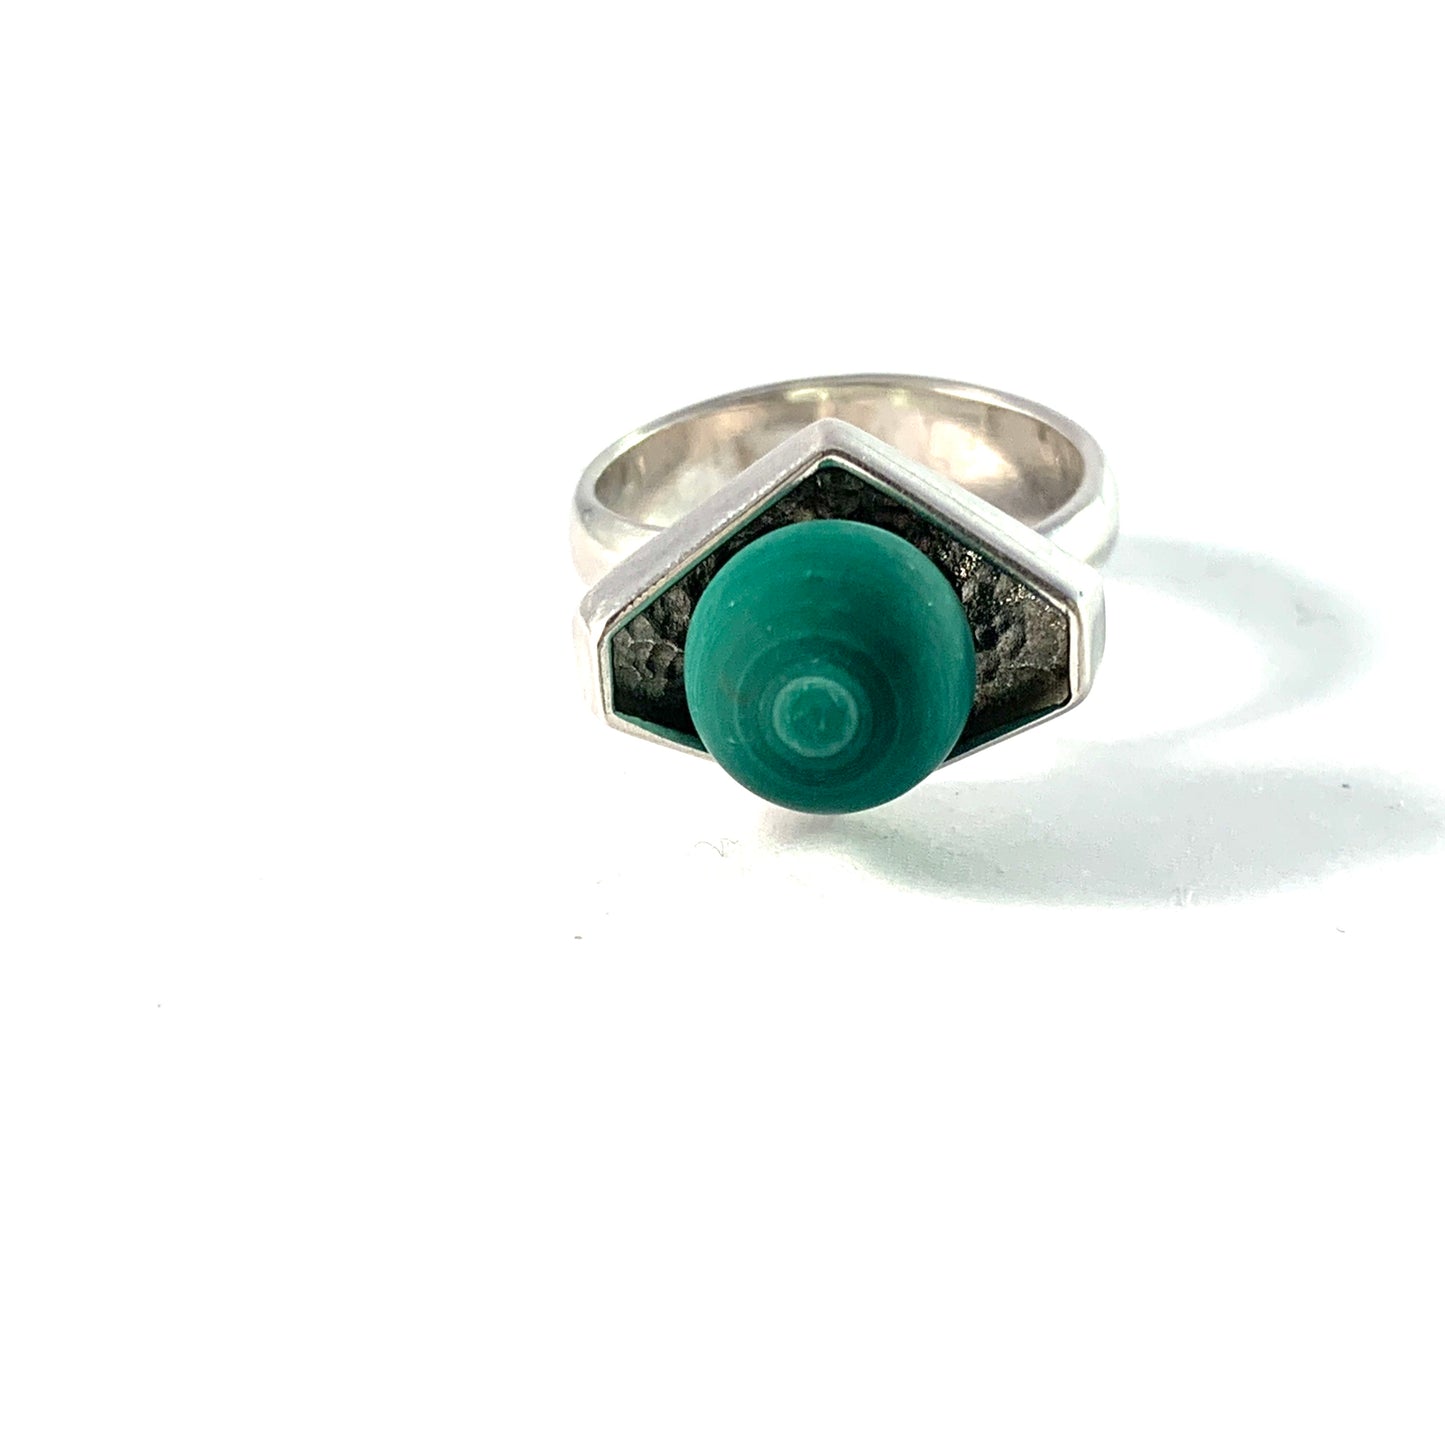 Germany / Austria 1960s. Solid Silver Malachite Modernist Ring. Makers' Mark.